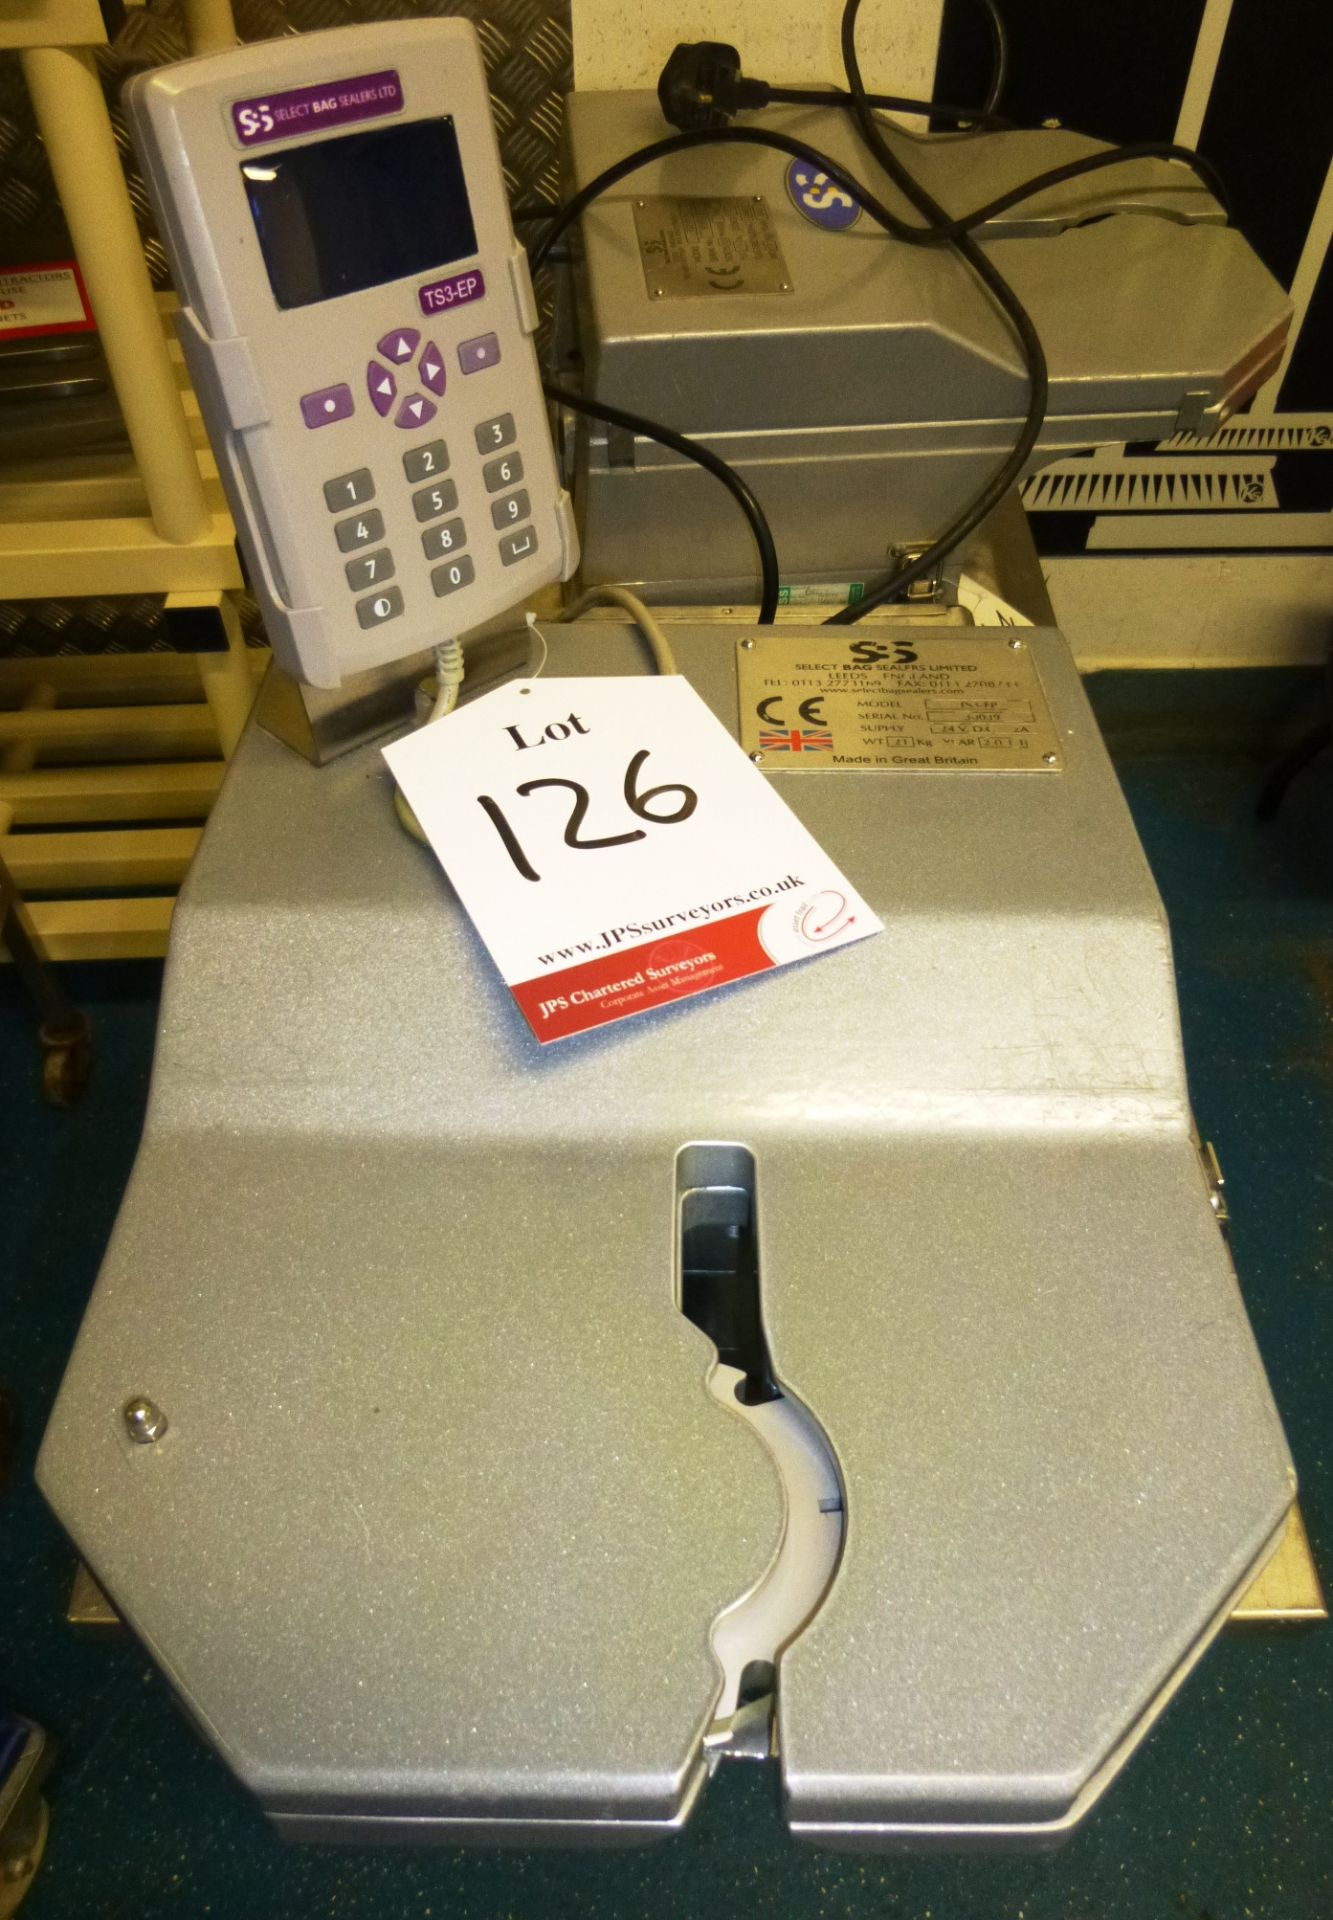 SBS TS3-EP (Tamper Evident) Table Top Sealer w/ Electronic Printer & Table Mounting Bracket - Image 2 of 5